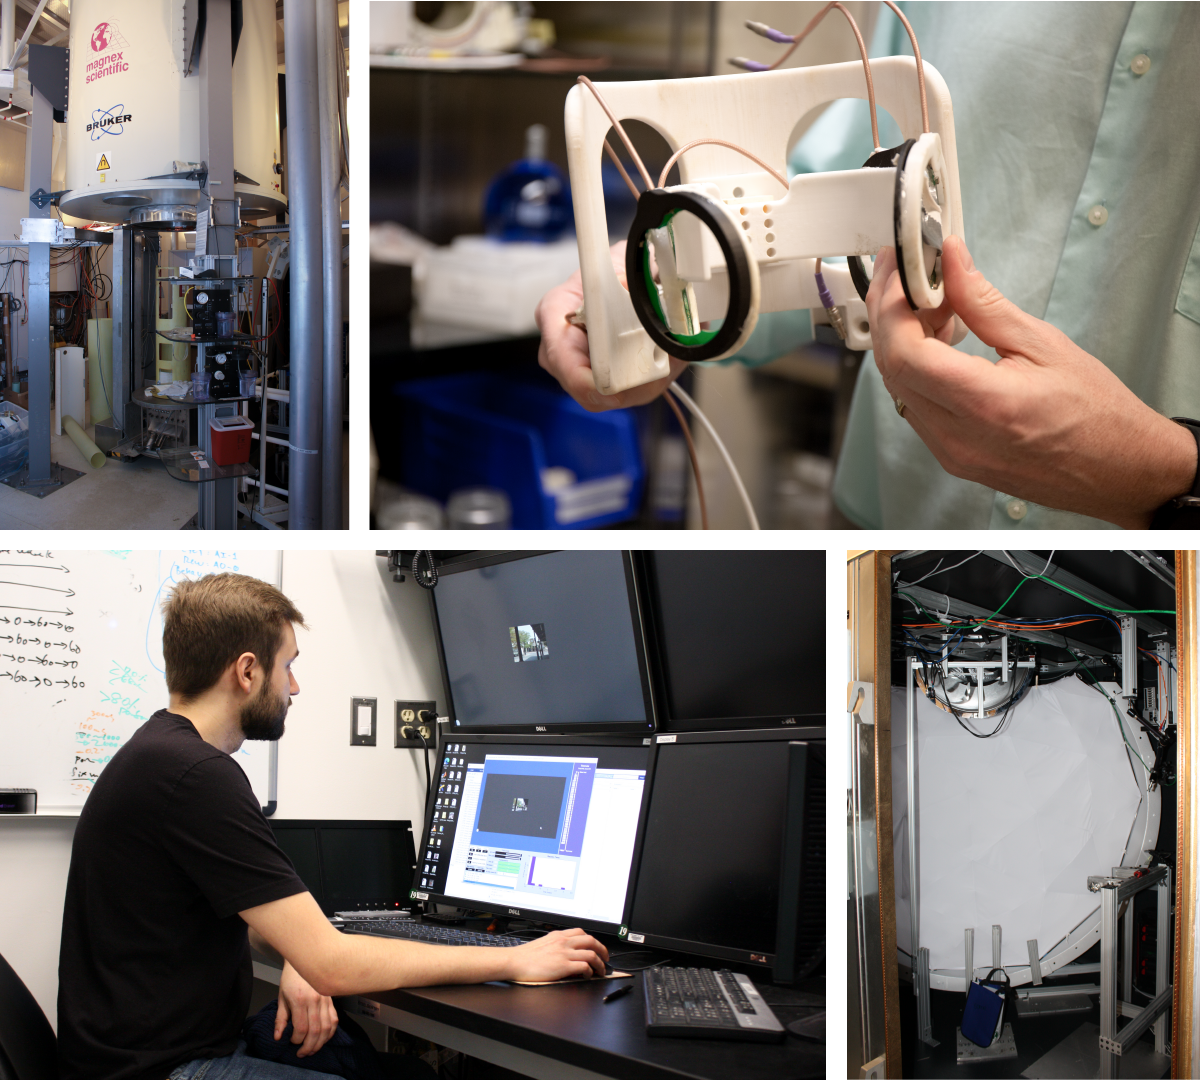 Collage of MRI and electrophysiology equipment.